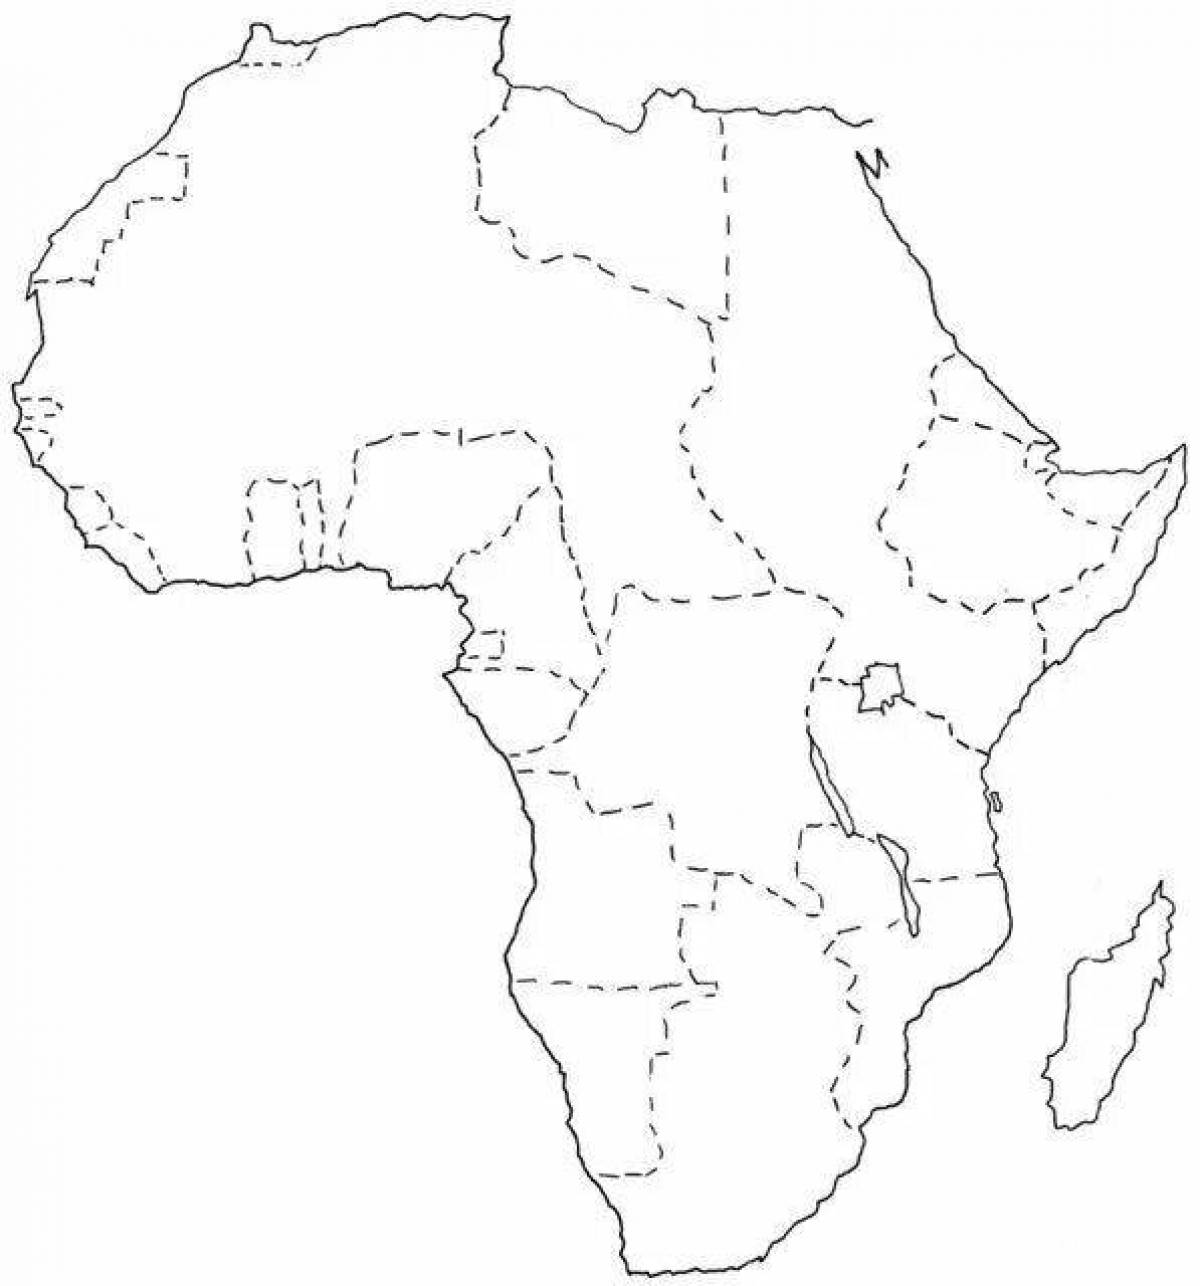 Coloring page of intricate africa map